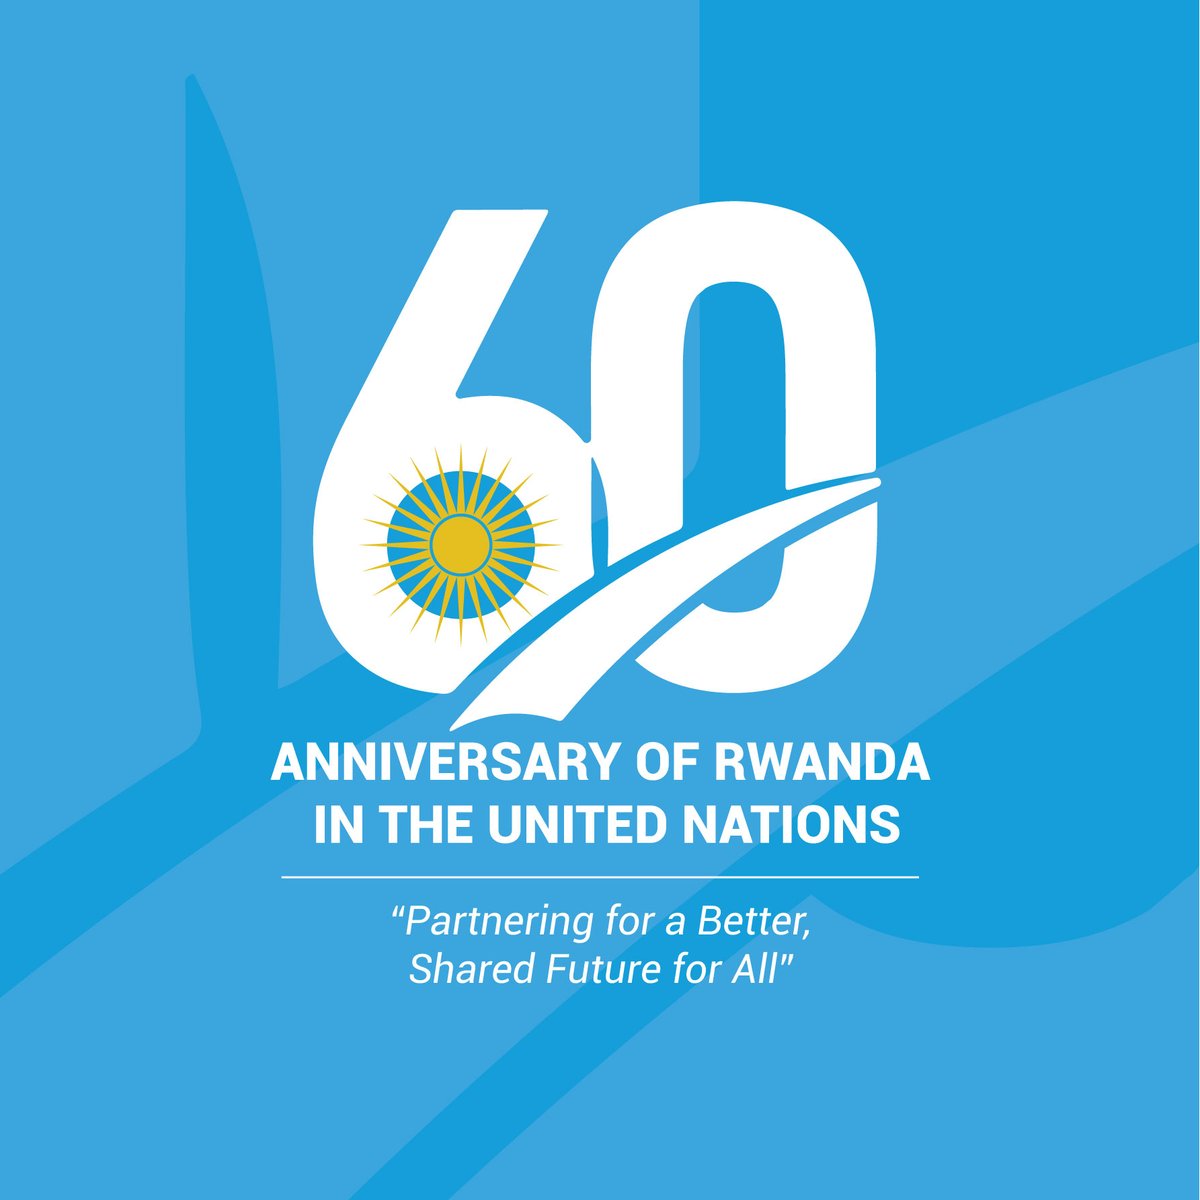 Press Release: The Government of Rwanda and the United Nations (UN) will celebrate the 60th anniversary of the country's membership in the UN under the theme “Partnering for a Better, Shared Future for All”. Read more: bit.ly/3Dca3vO #60yearsRwandaUN